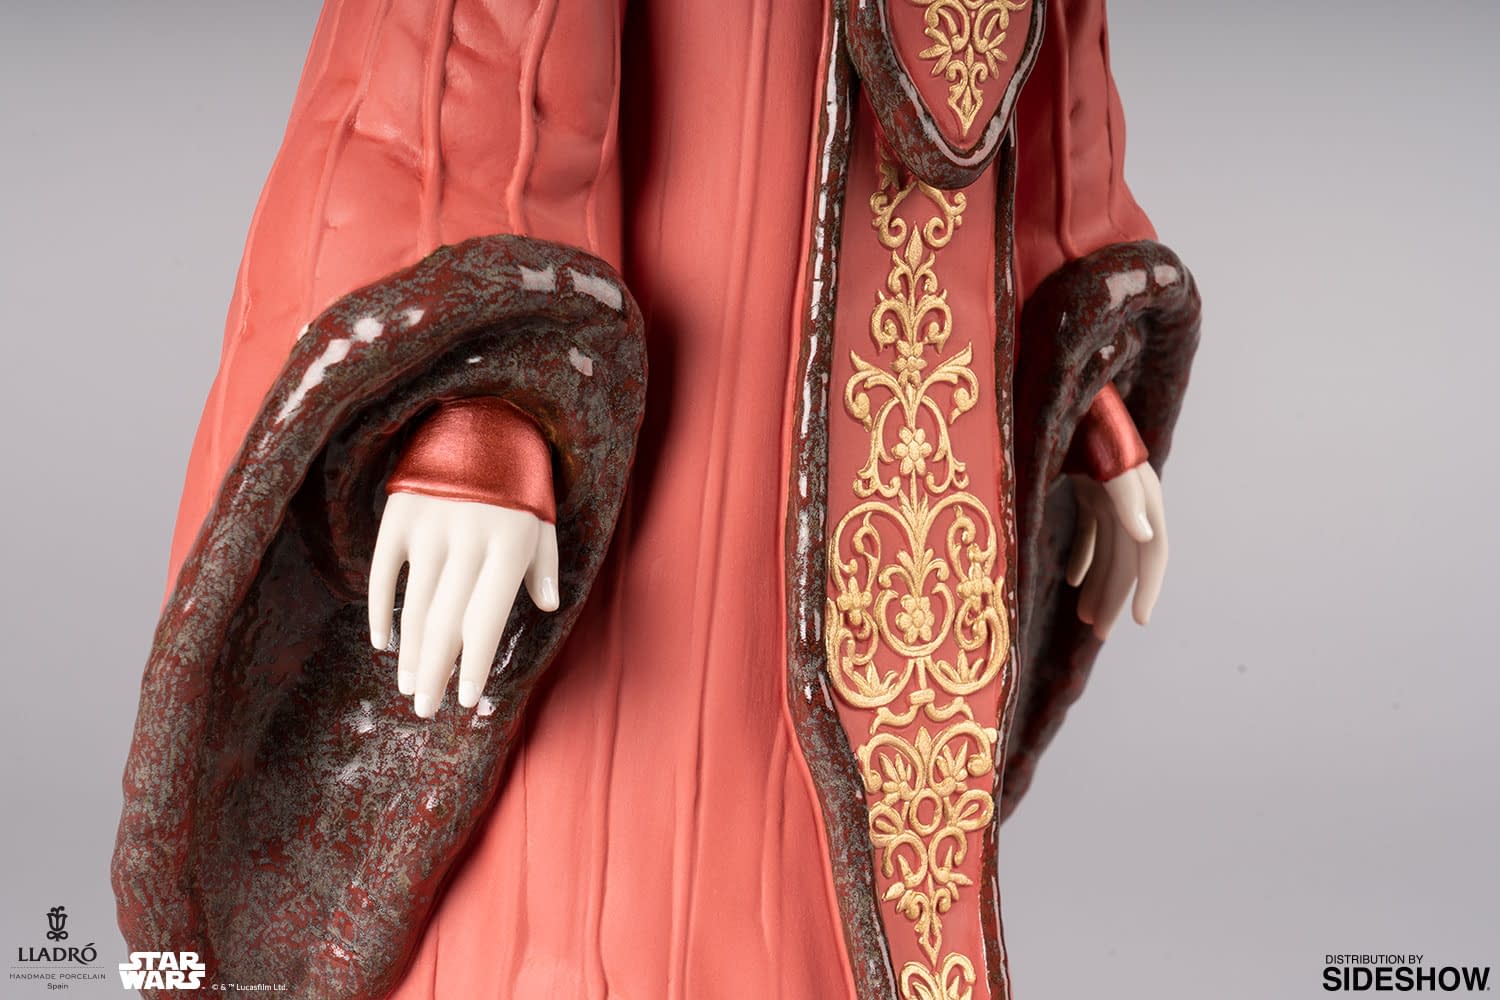 Star Wars Queen Amidala Enters a Throne Room with New Statue